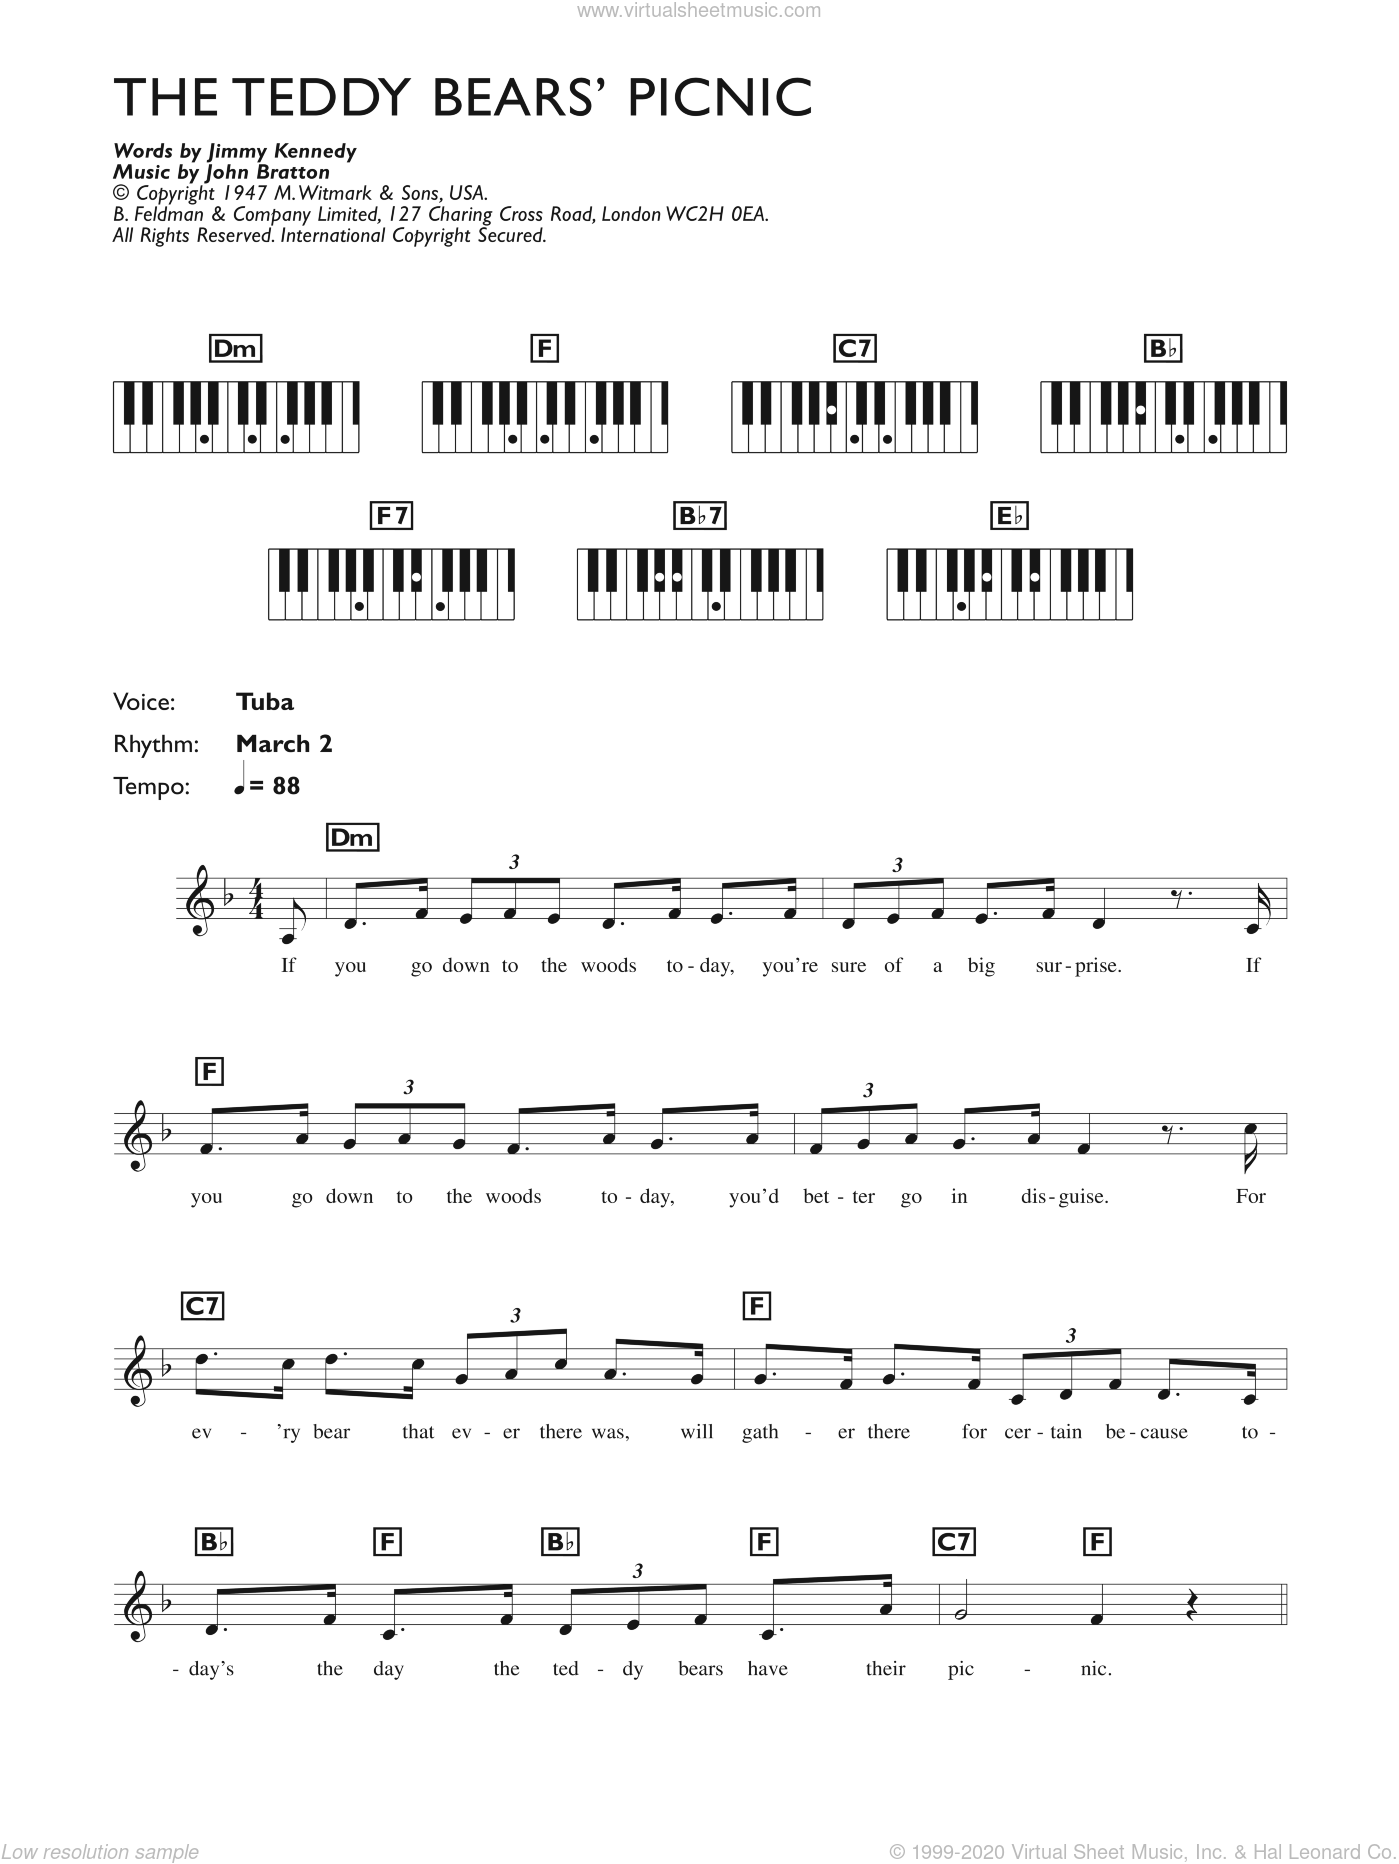 Kennedy - The Teddy Bears' Picnic Sheet Music For Piano Solo.